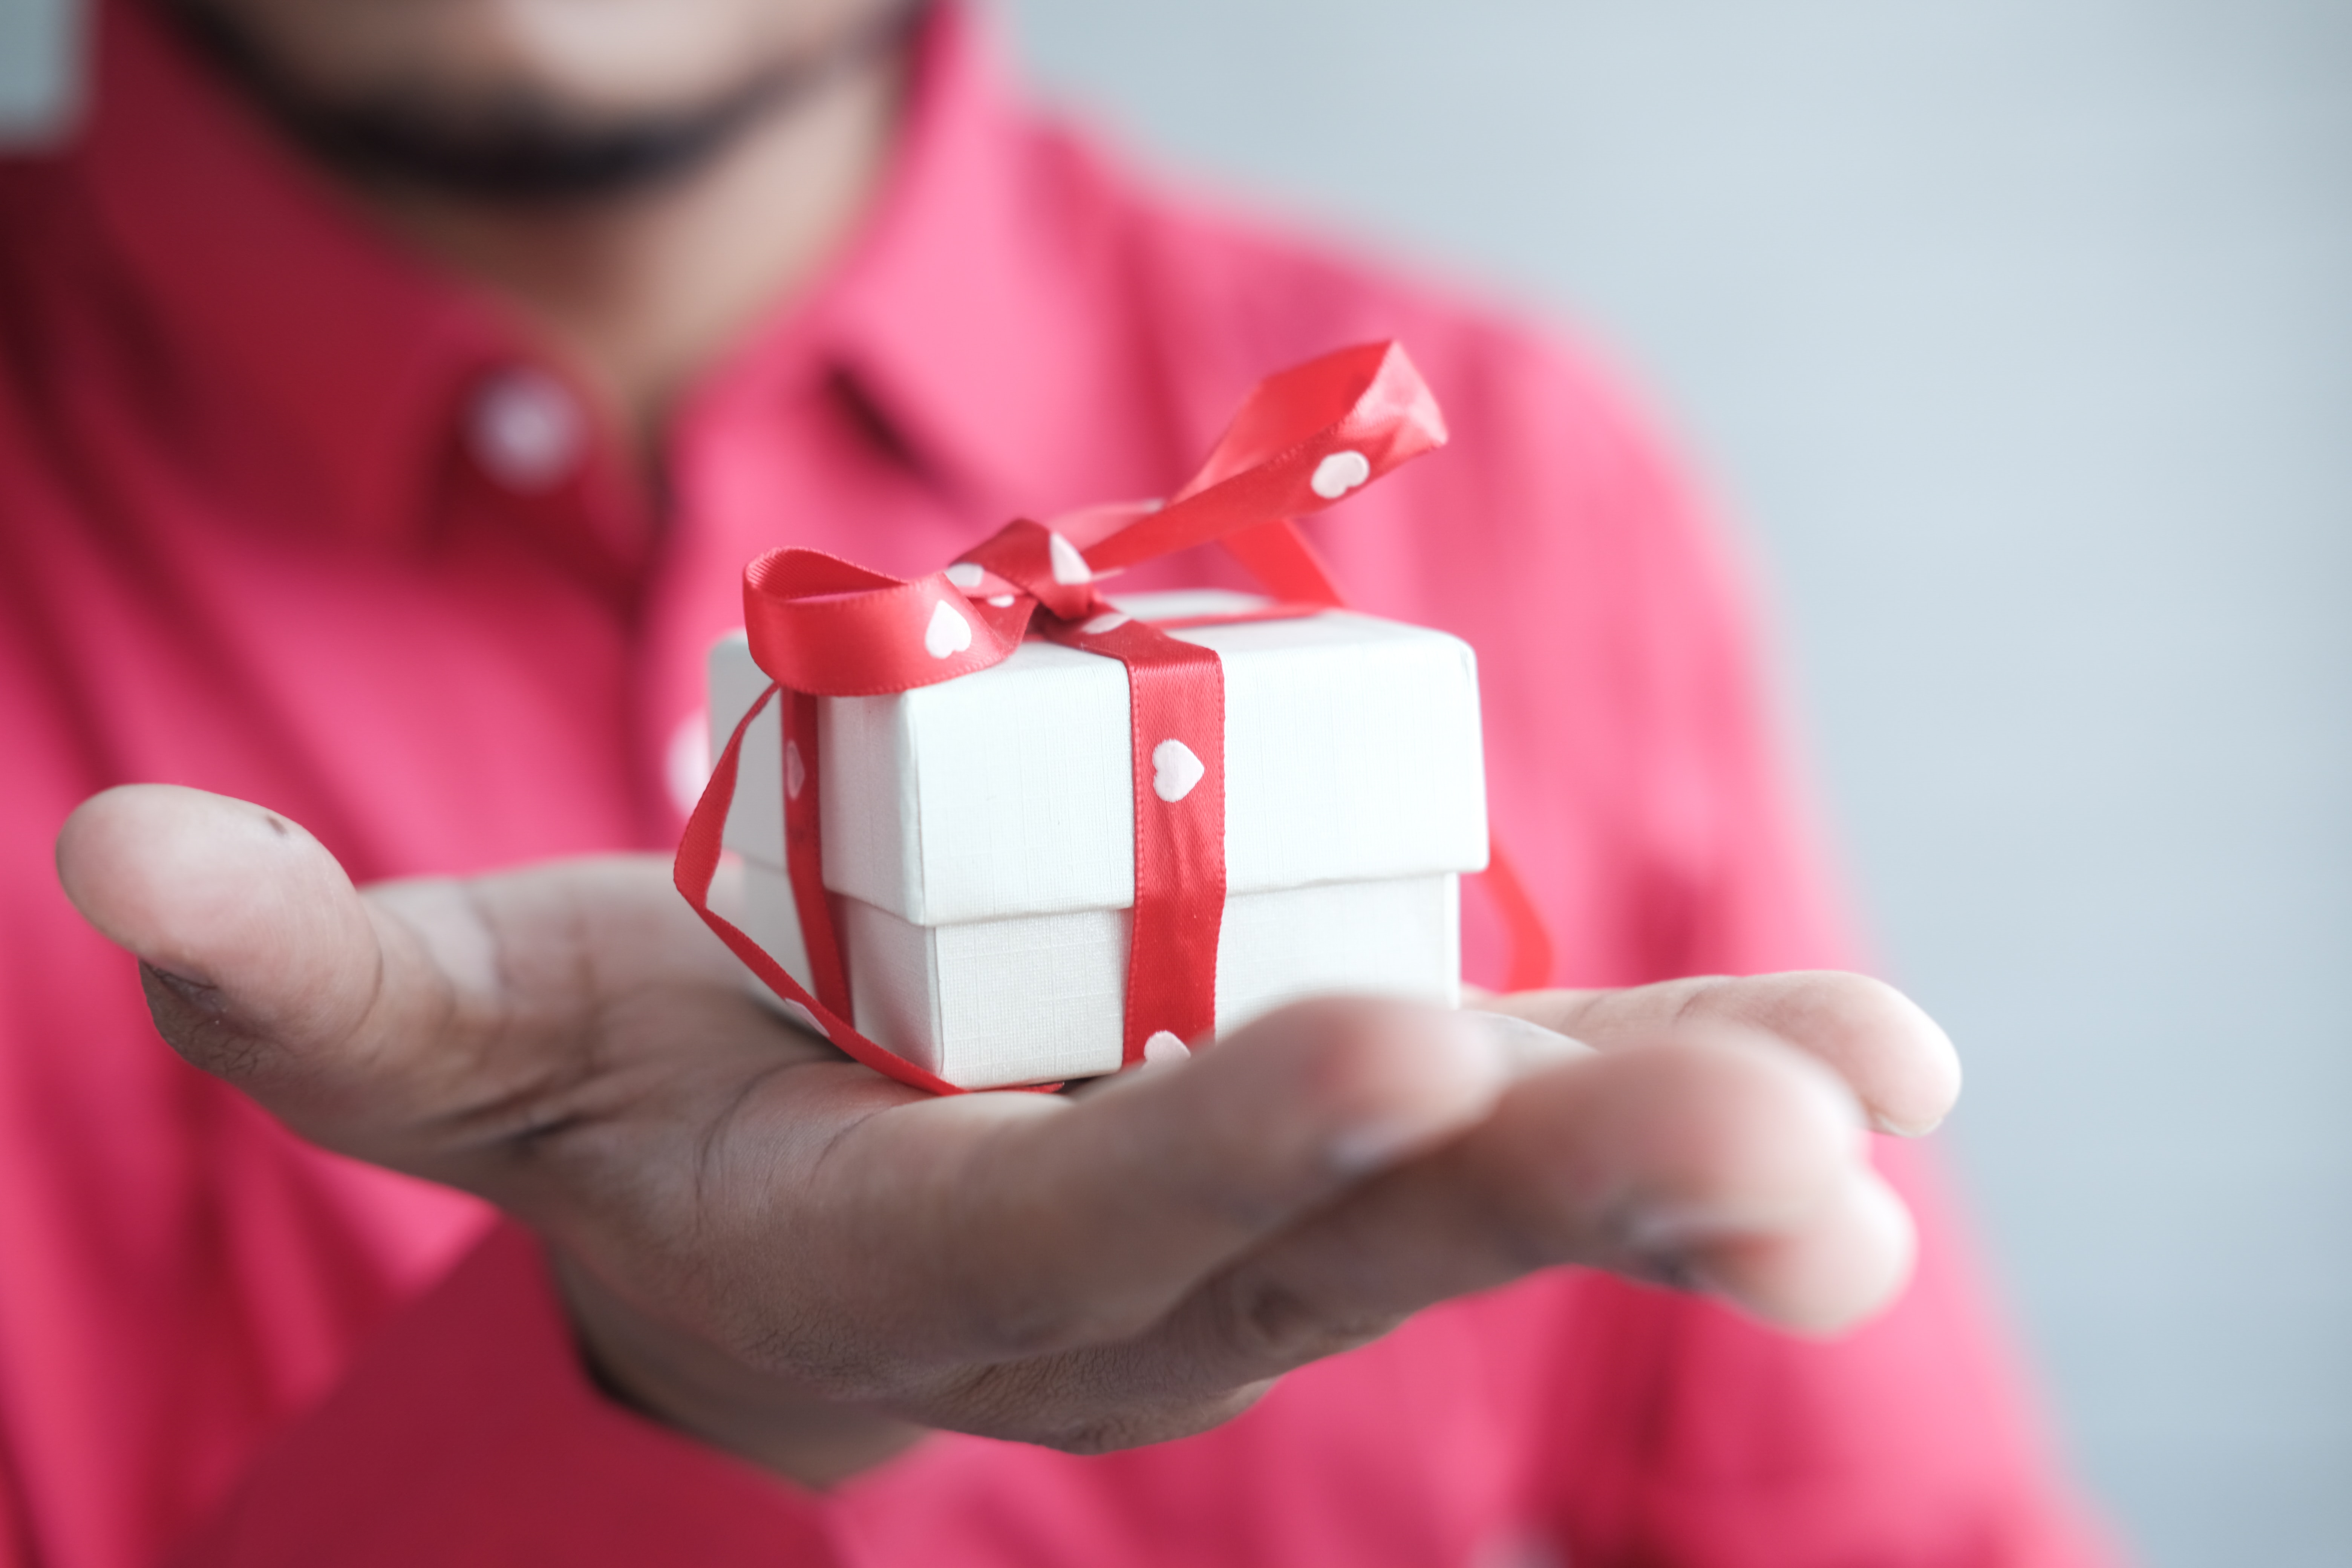 Man in a red shirt holding out his hand with a small white box gift in his hand.